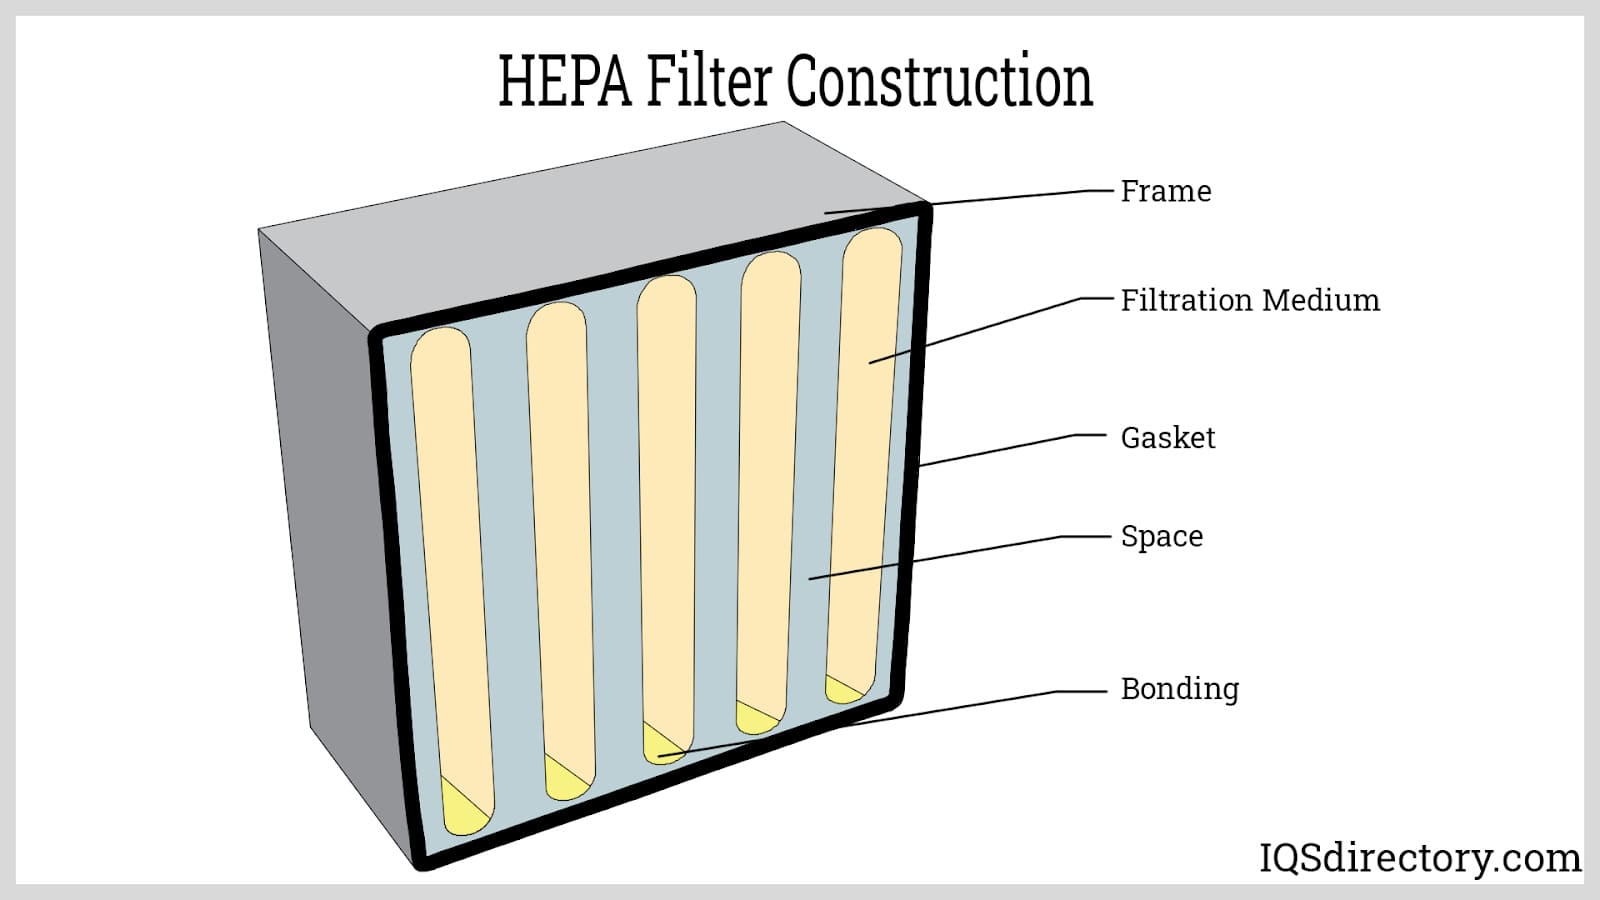 HEPA Air Filters: Classifications, Design, Uses, and Testing